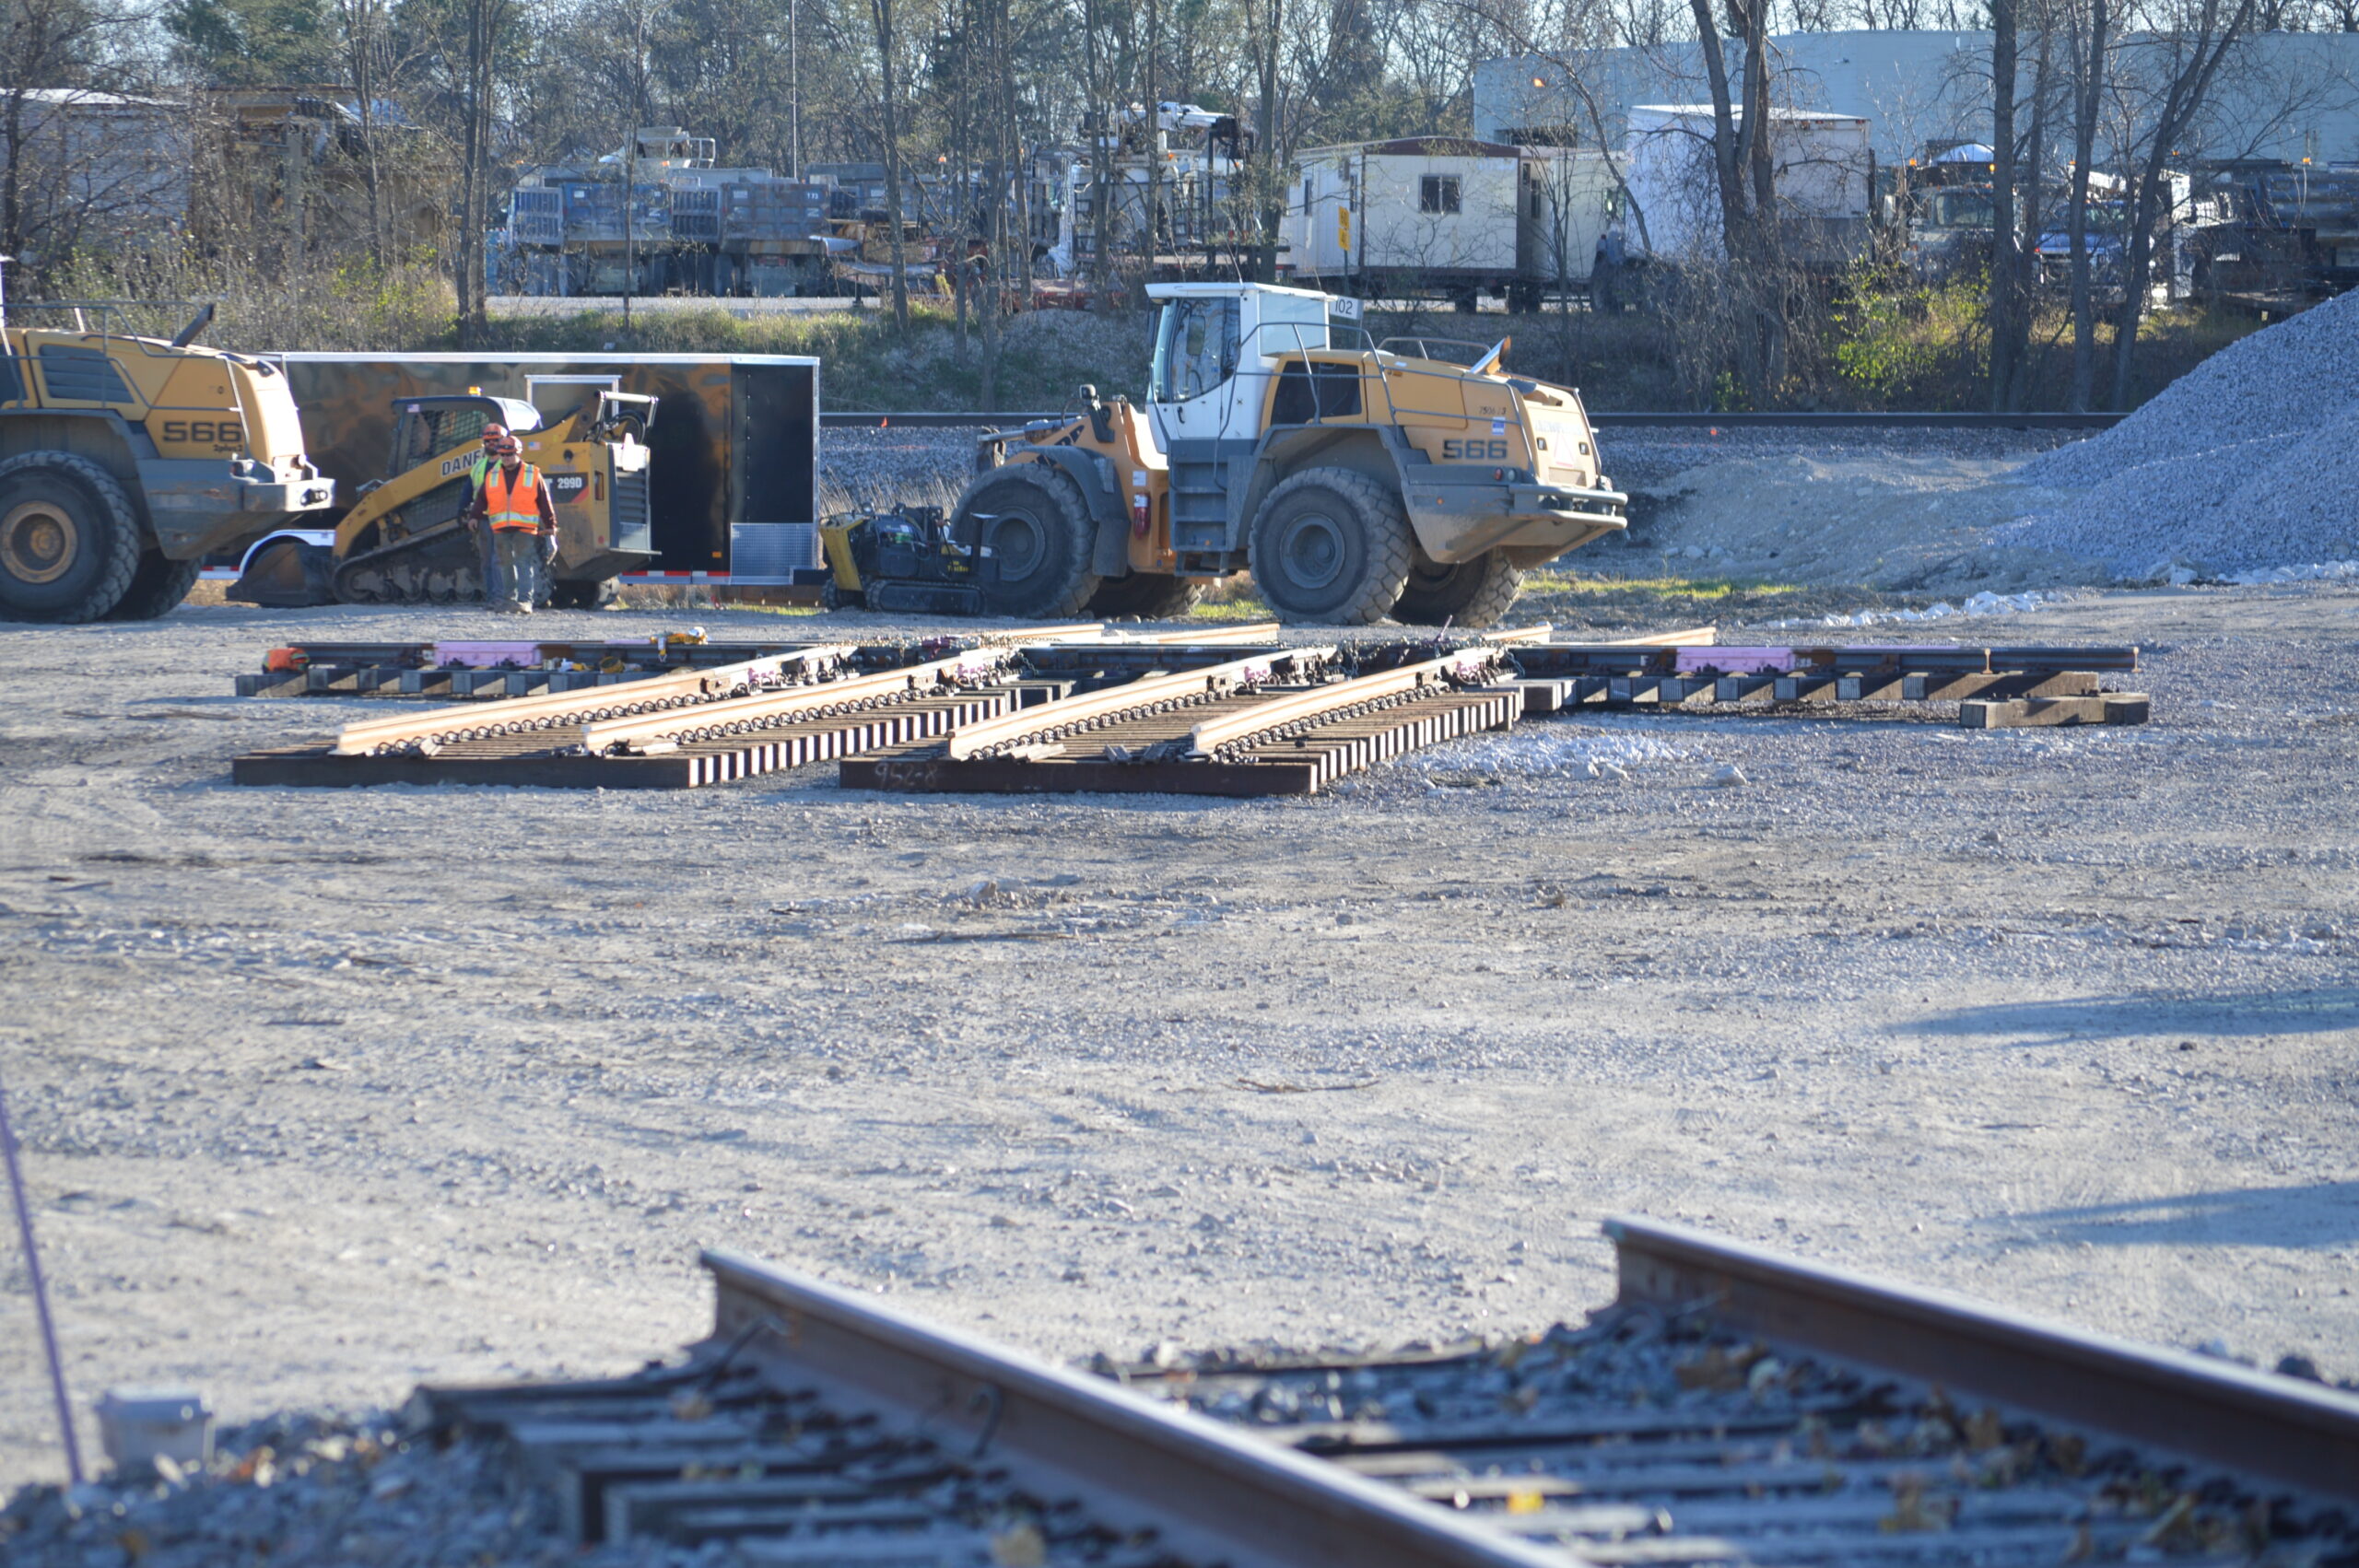 The two tracks of the Canadian Pacific main are assembled to the single track of the Canadian National main to form a diamond crossing panel laying in the staging yard.